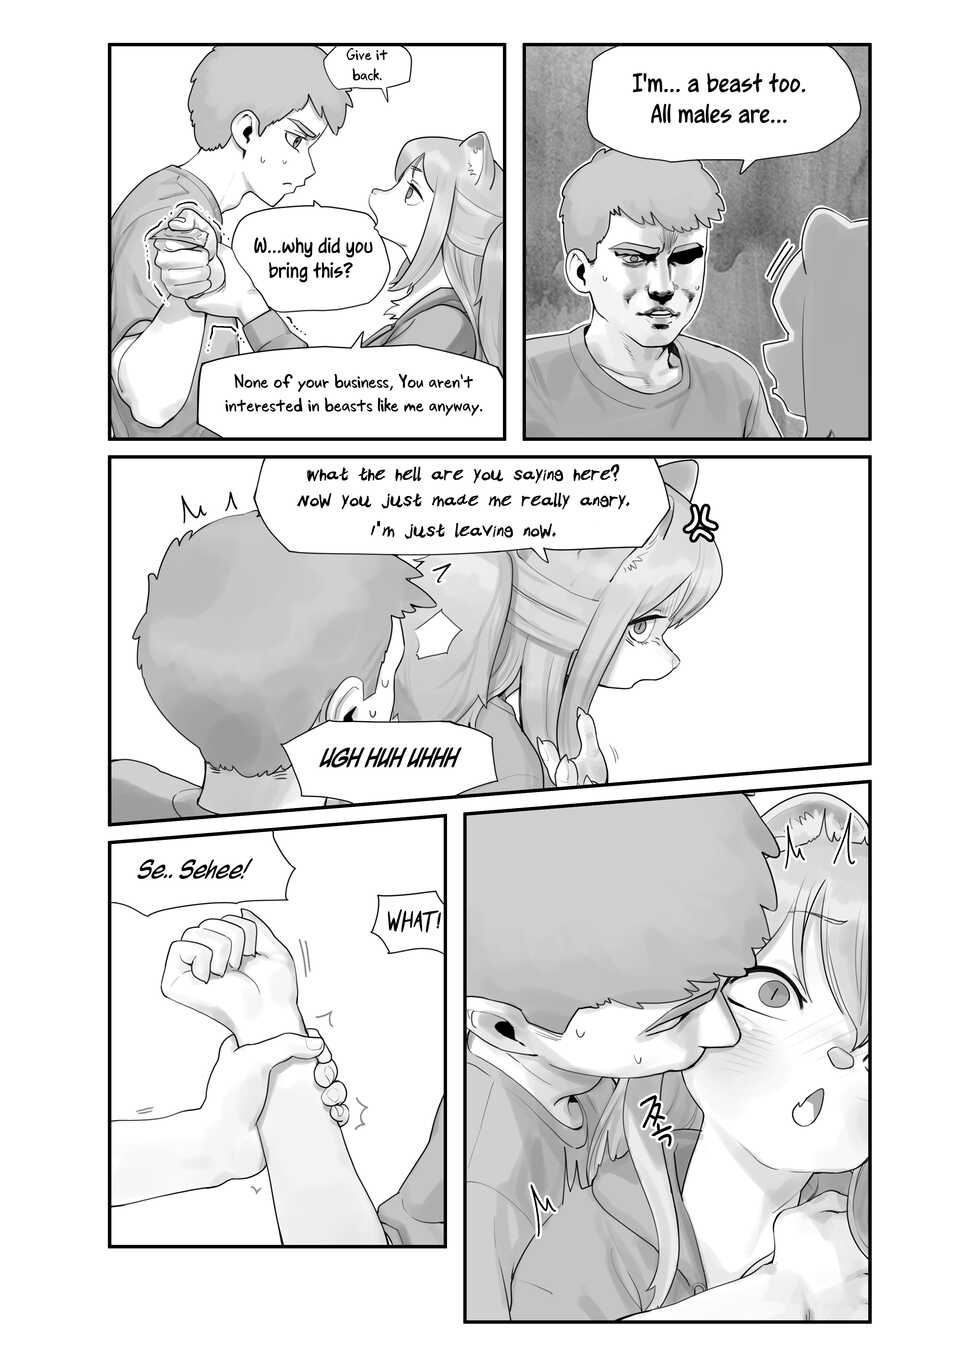 [Gudl] A Suspiciously Erotic Childhood Friend [English] [Uncle Bane] - Page 3